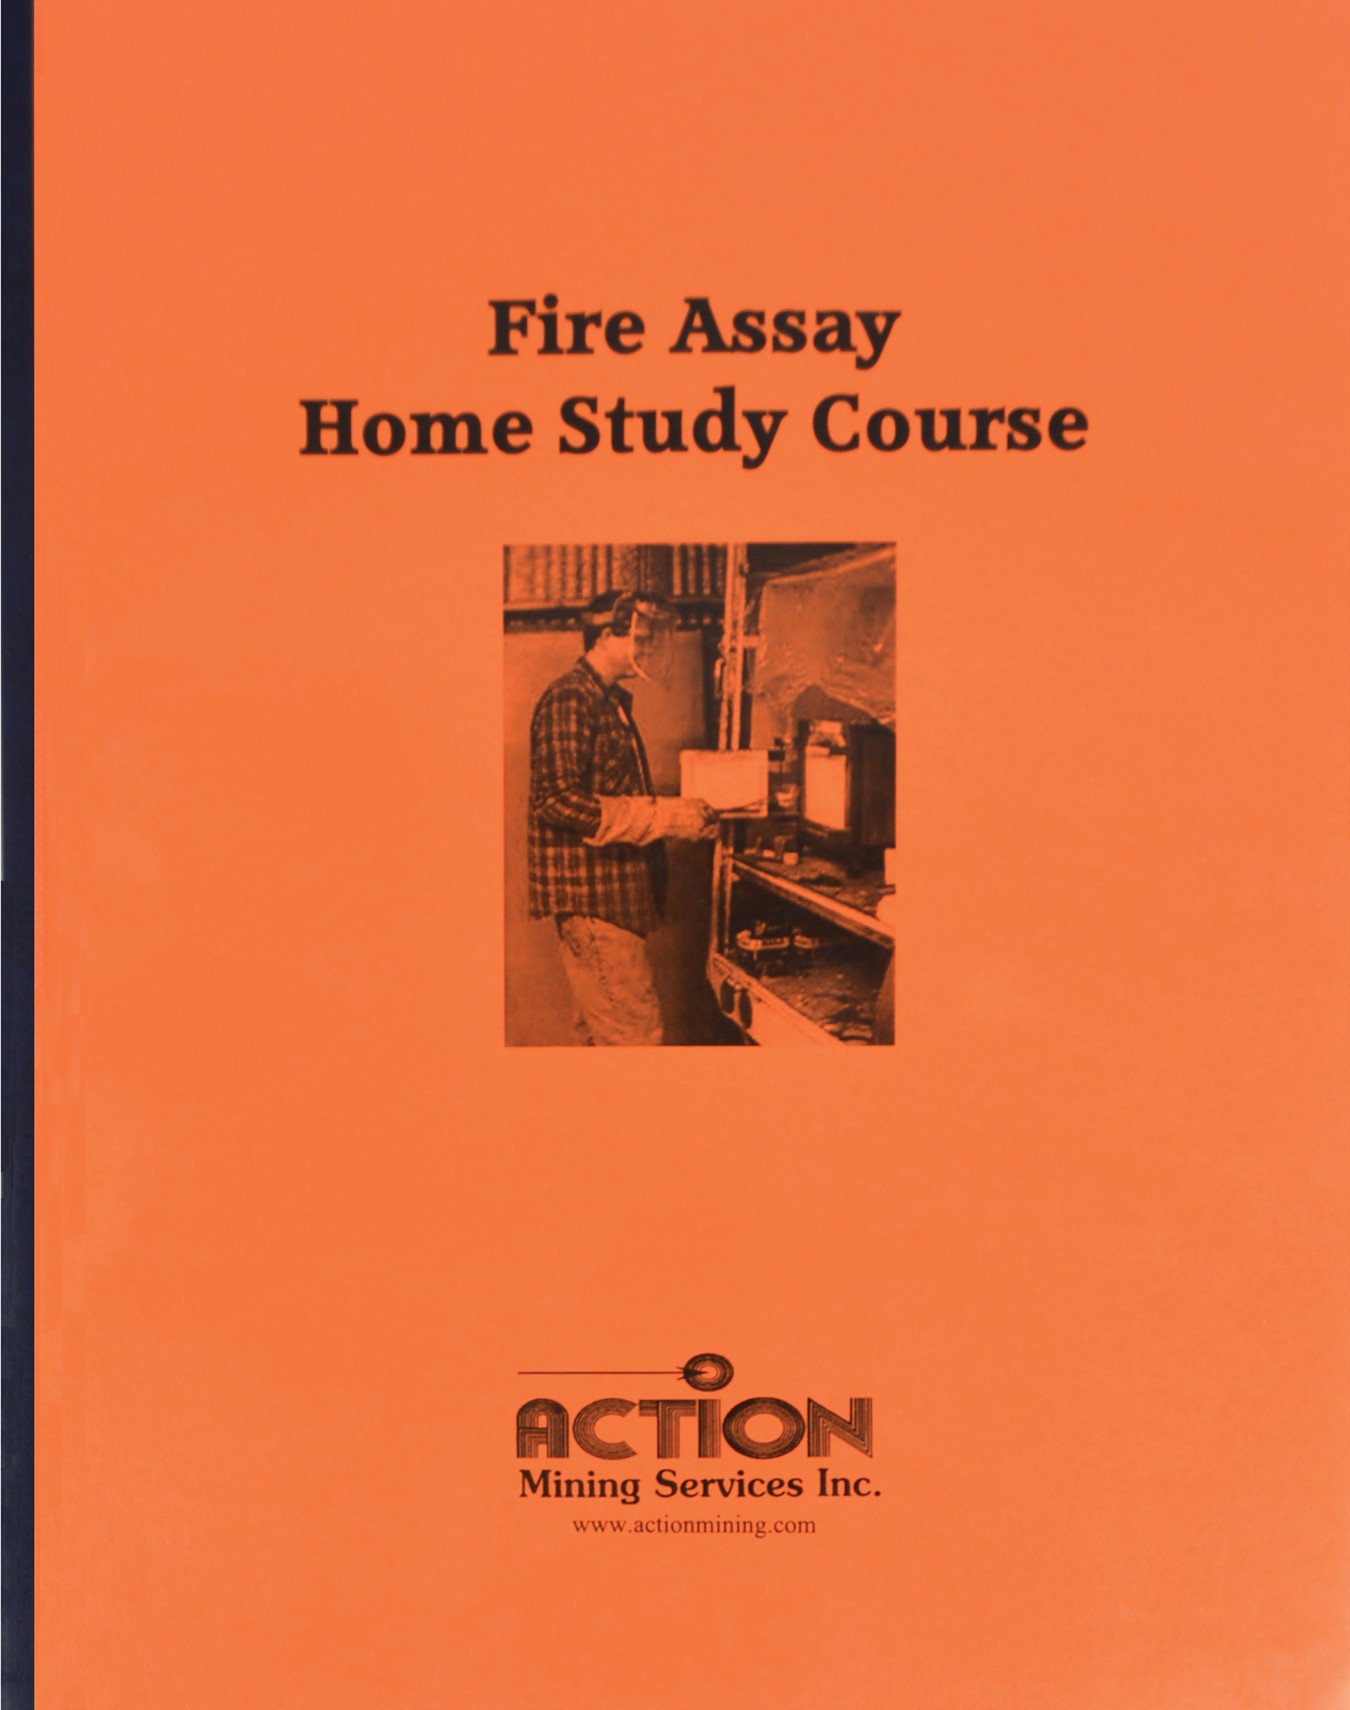 Fire Assay Home Study Course by Action Mining Services